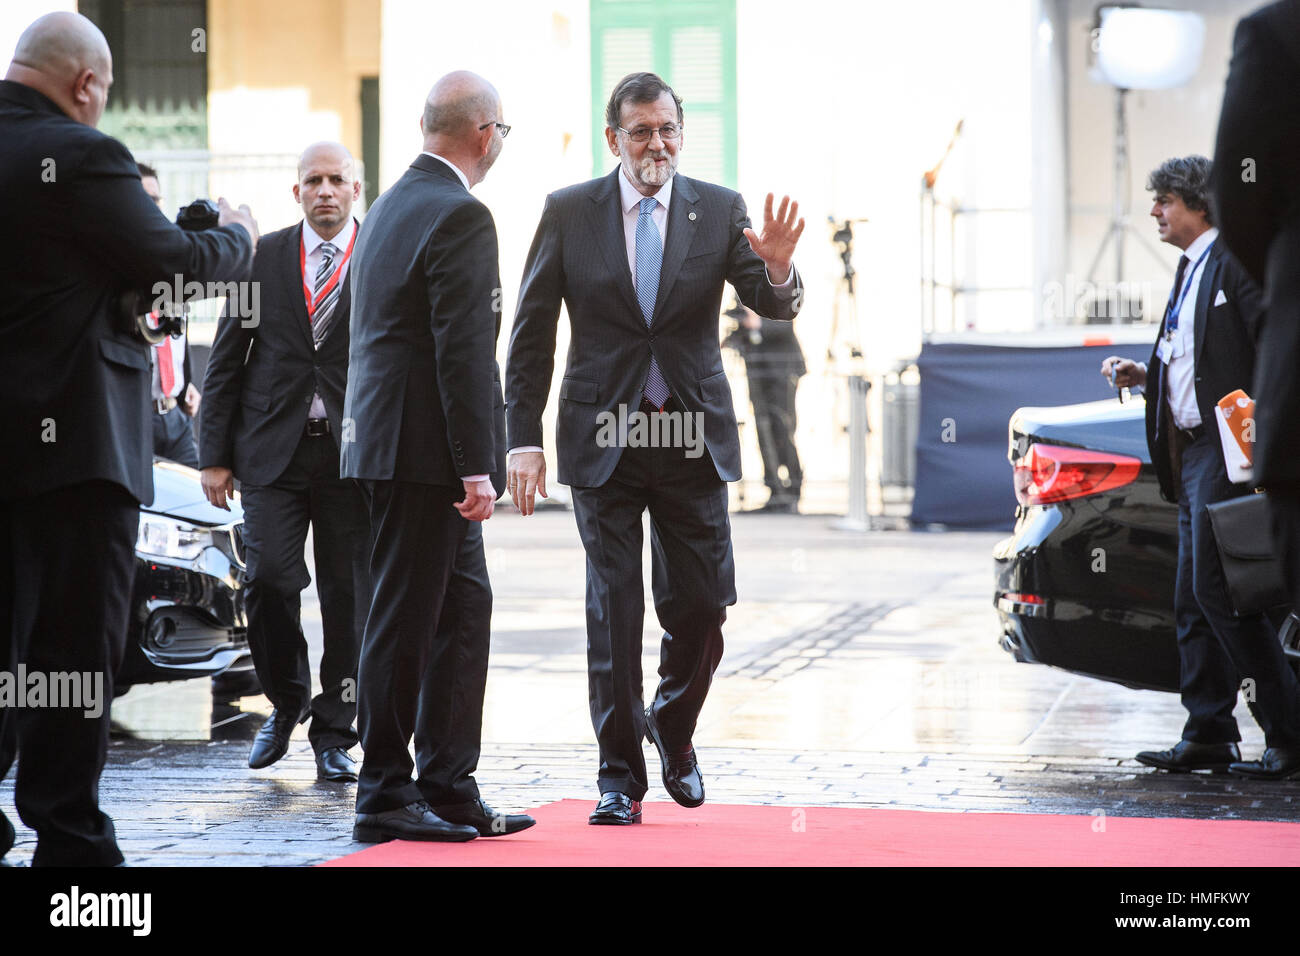 Prime Minister of Spain Mariano Rajoy Brey arriving at the at the Grandmaster's Palace in Valletta, Malta, for an informal summit. Stock Photo